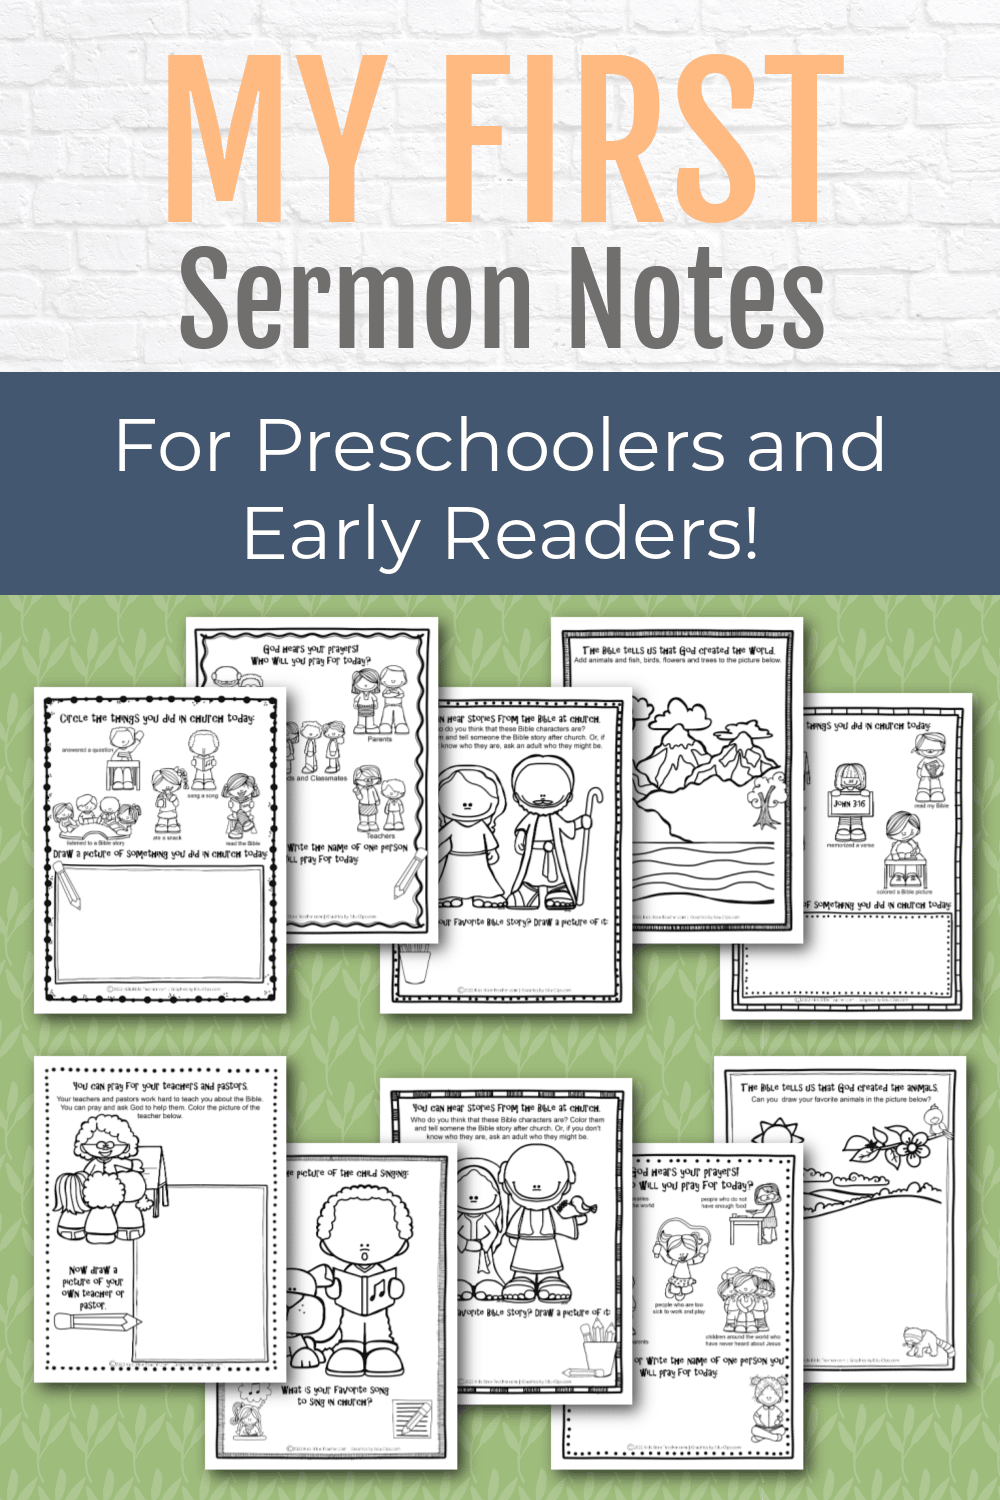 Help your own kids or kids in your church engage in the adult service with these printable Sermon Notes for preschoolers and Early Readers.